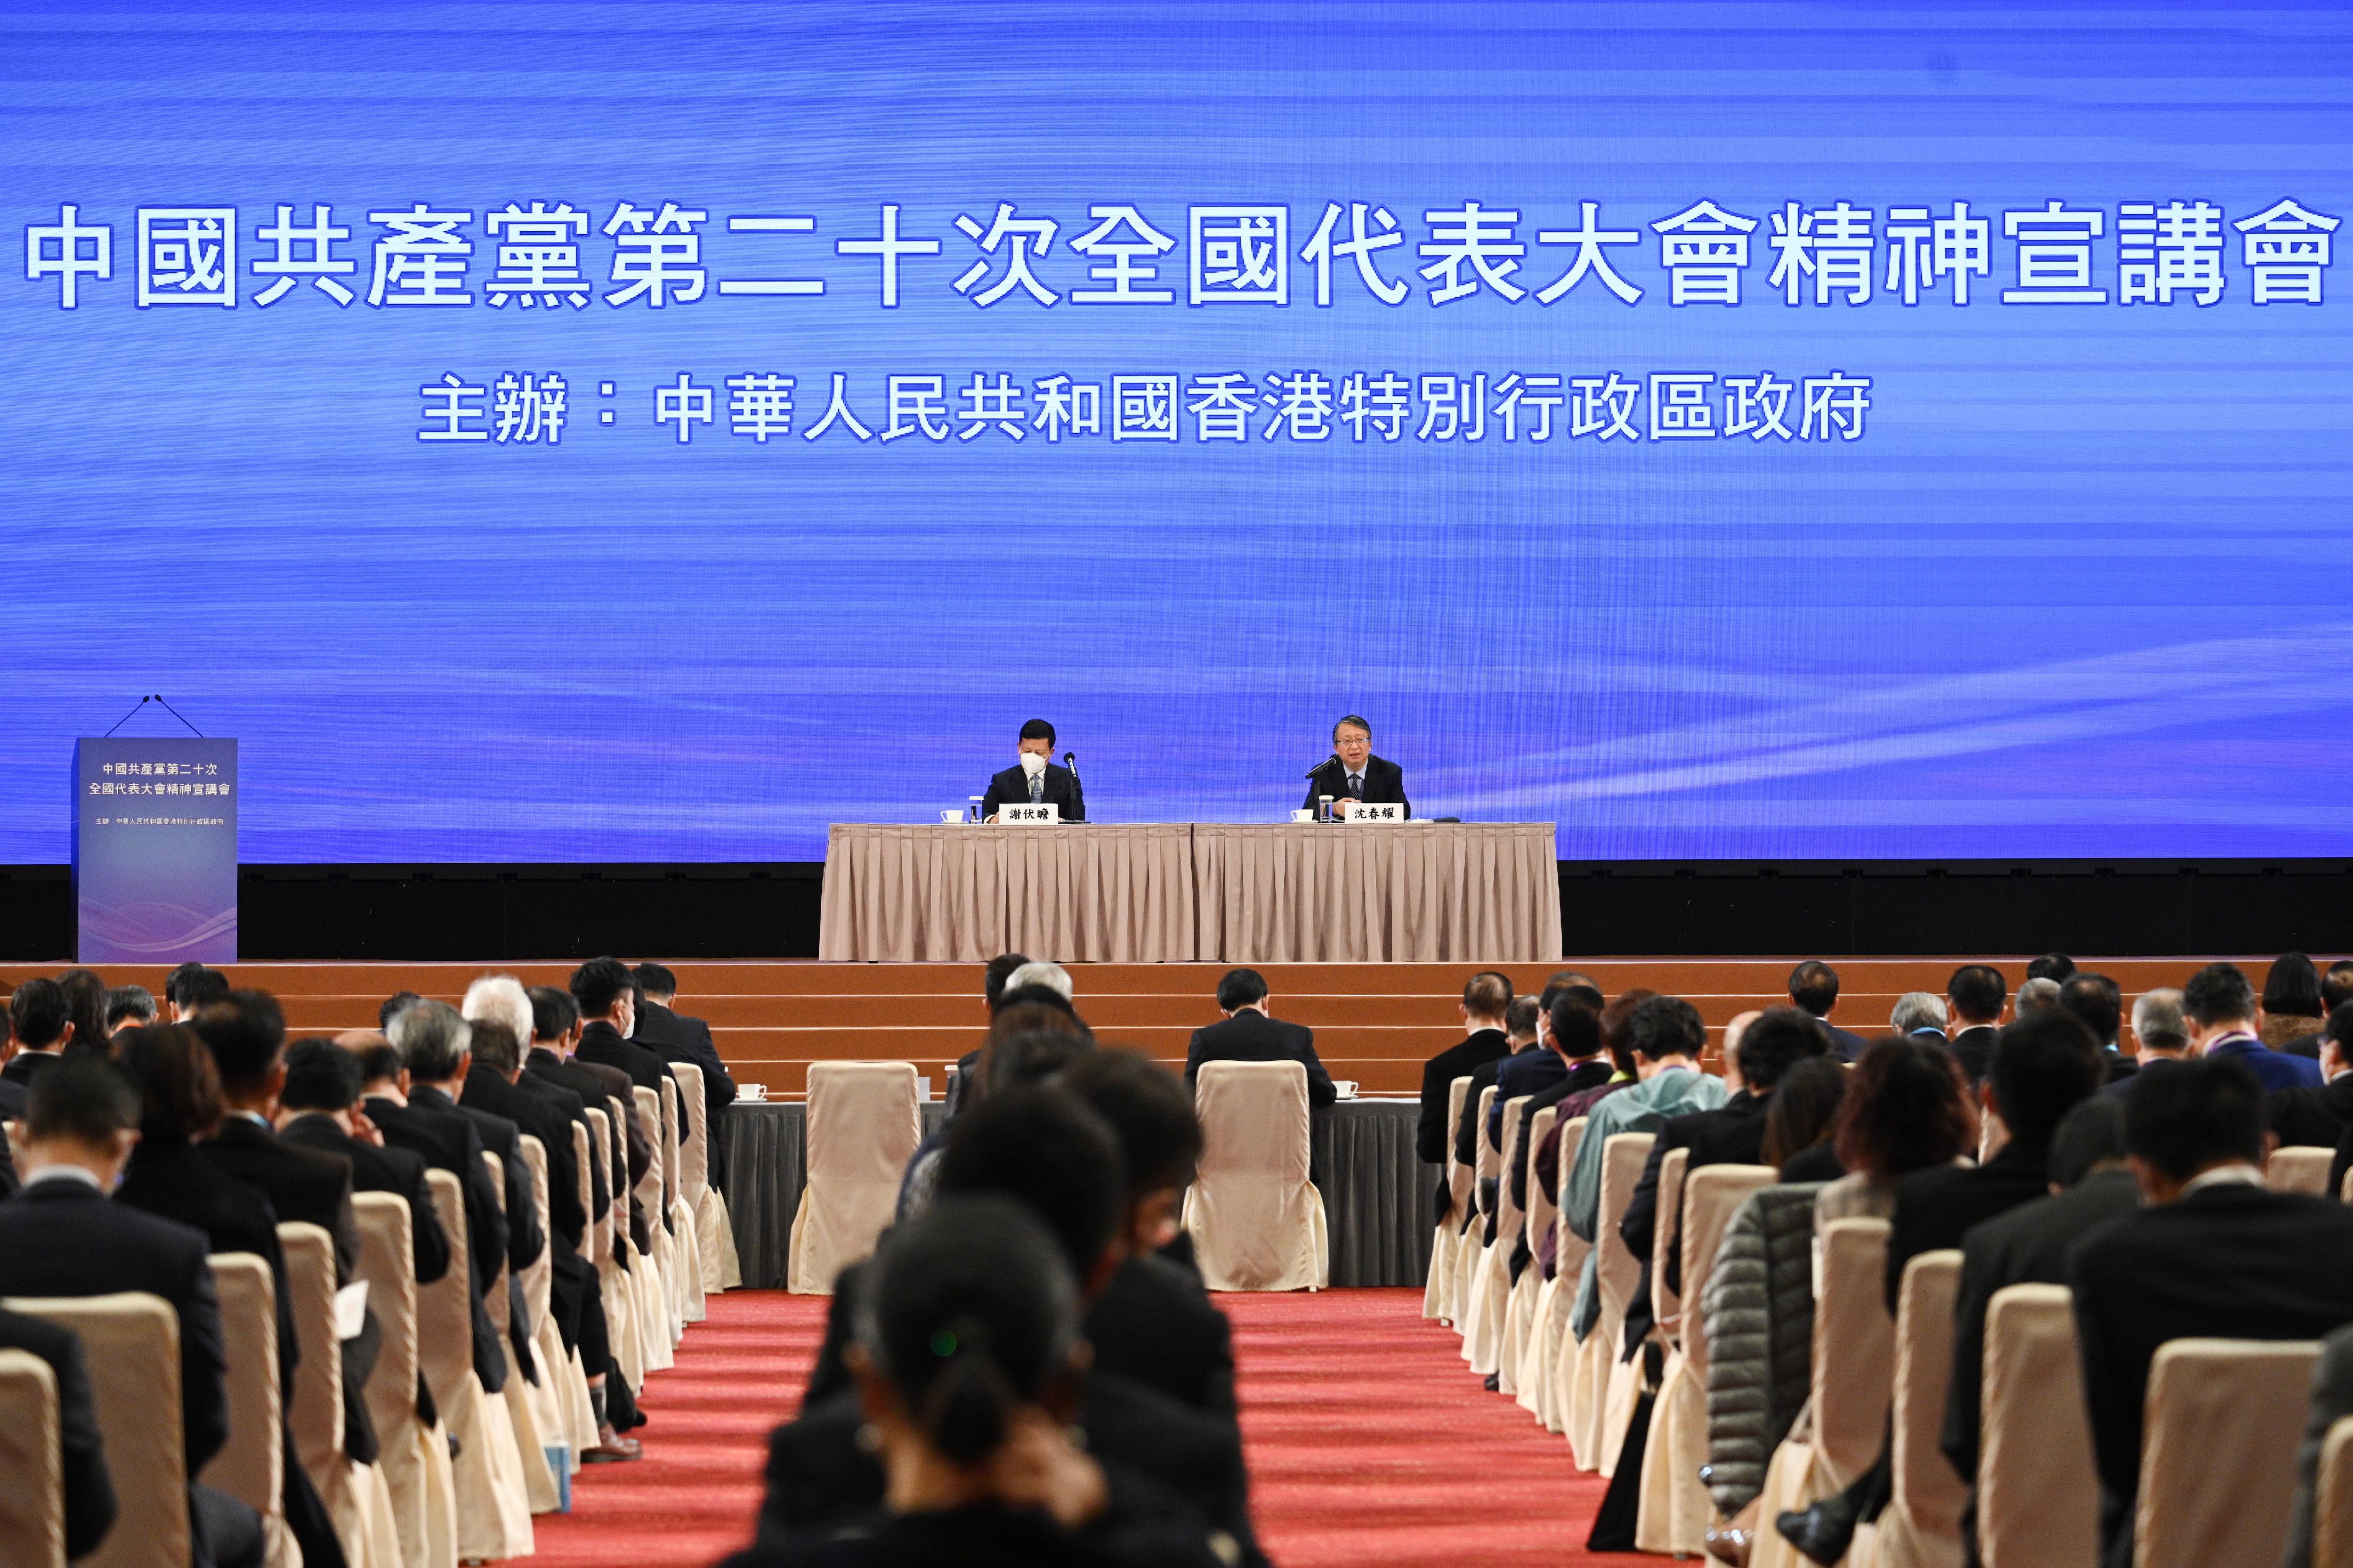 The Hong Kong Special Administrative Region Government held seminars to promote the spirit of the 20th National Congress of the CPC at the Hong Kong Convention and Exhibition Centre, Wan Chai today (December 3). The keynote speakers of the delegation include the Chairman of the Legislative Affairs Commission of the Standing Committee of the National People's Congress, Mr Shen Chunyao (right), and the Vice-Chairman of the Committee on Economic Affairs of the National Committee of the Chinese People's Political Consultative Conference, Mr Xie Fuzhan (left).